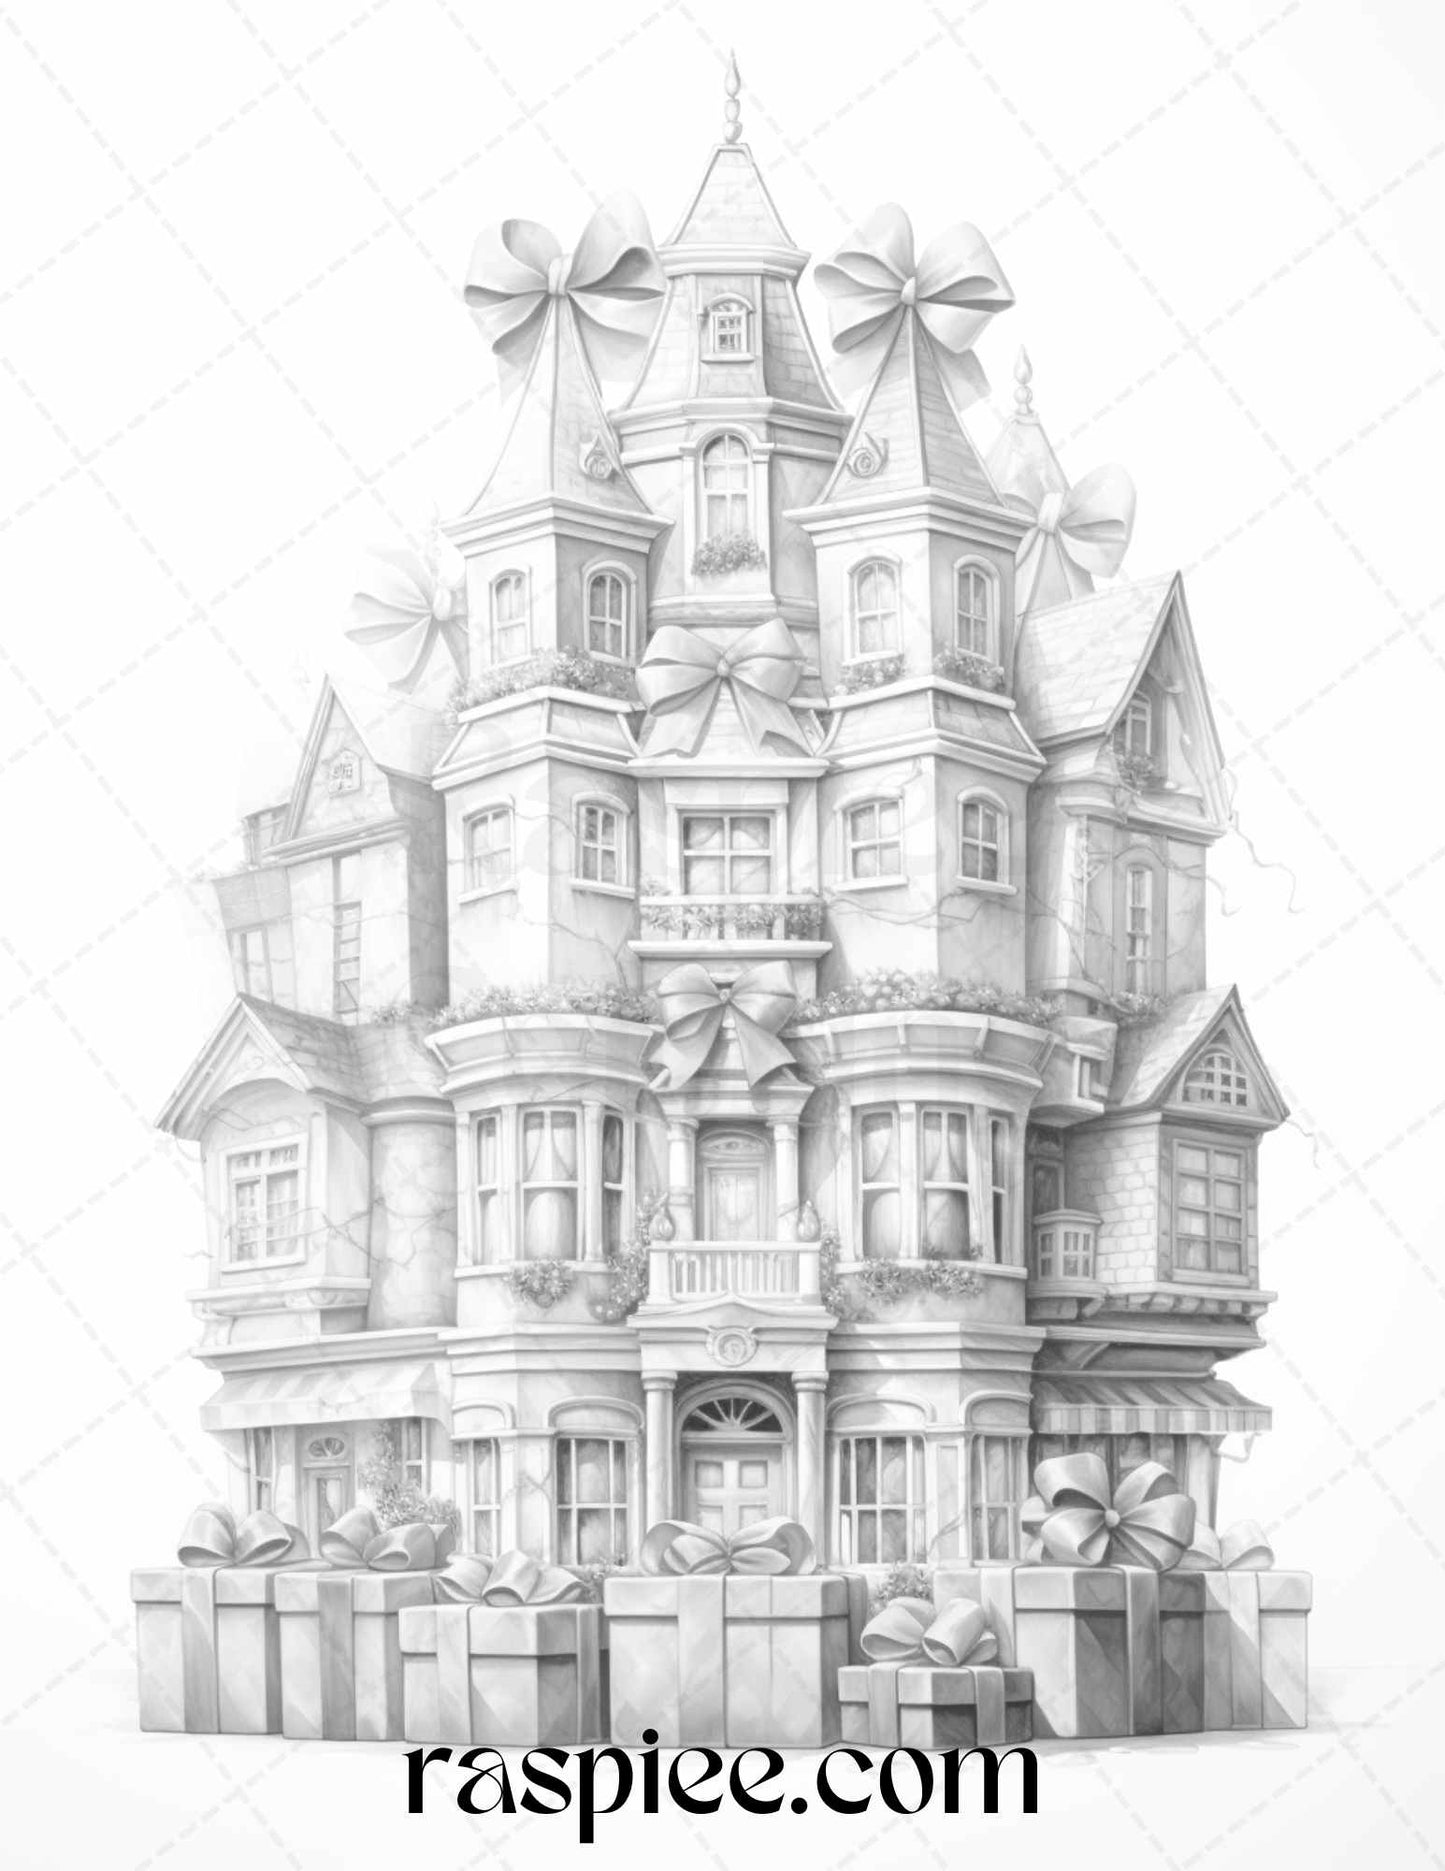 40 Adorable Gift Box Houses Grayscale Coloring Pages Printable for Adults Kids, PDF File Instant Download - Raspiee Coloring